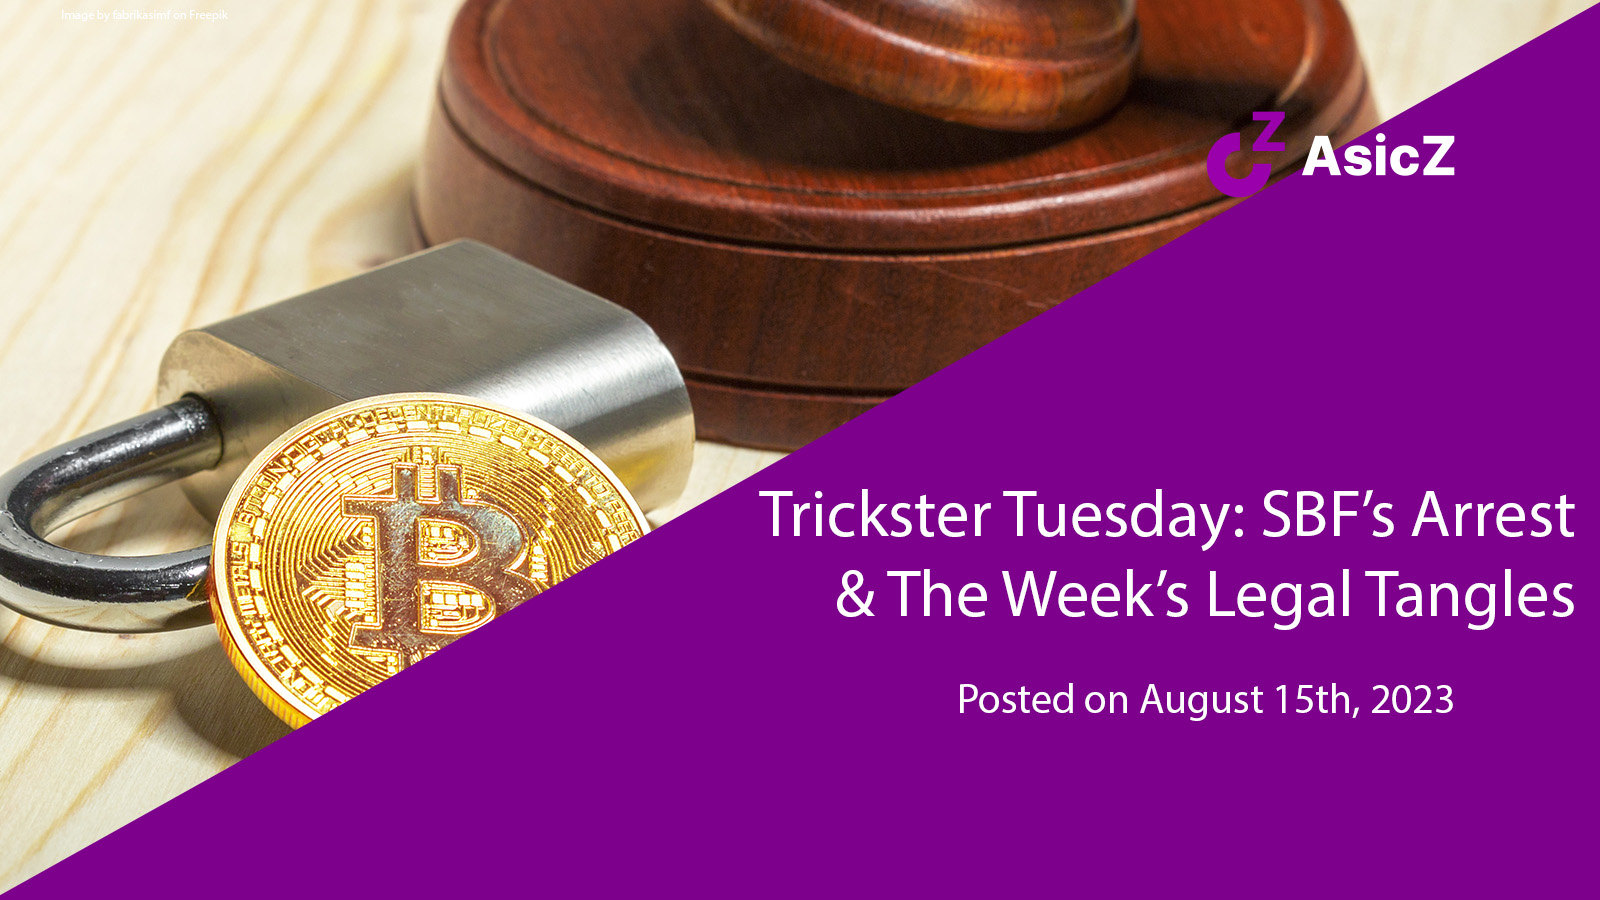 Trickster Tuesday: SBF’s Arrest & The Week’s Legal Tangles